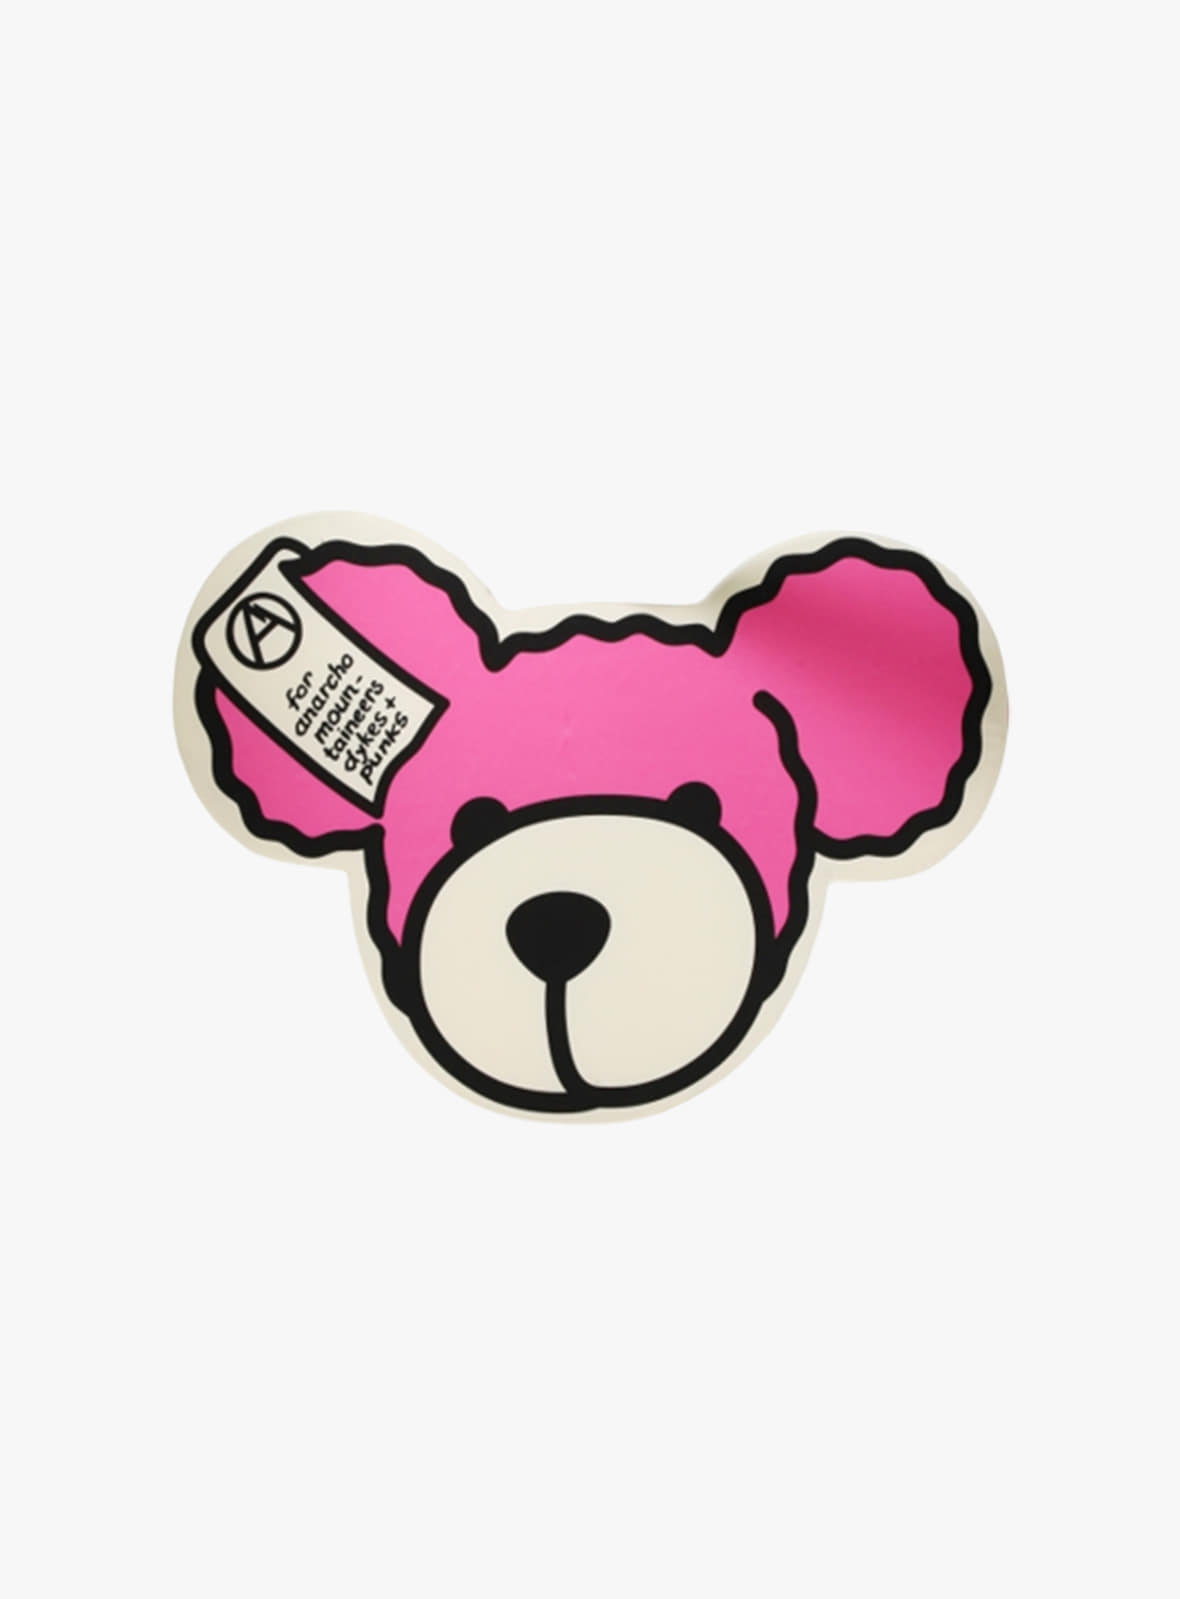 mountain research - Bear Pad pillow Home Accessories MTR3558PINK